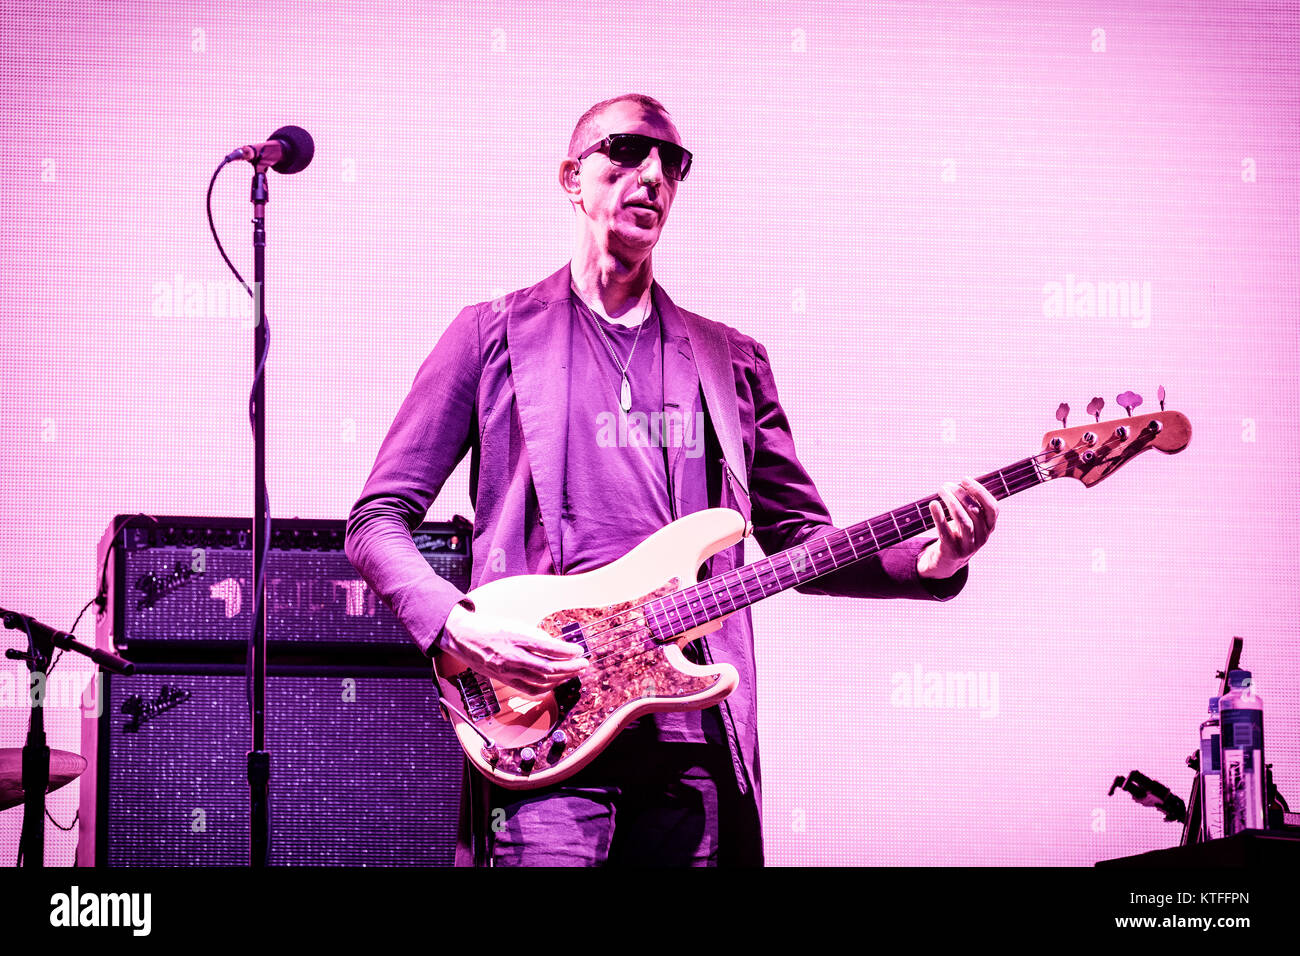 Bass player Pino Palladino of John Mayer seen live on stage at a live concert at Oslo Spektrum. Norway, 08/05 2017. Stock Photo